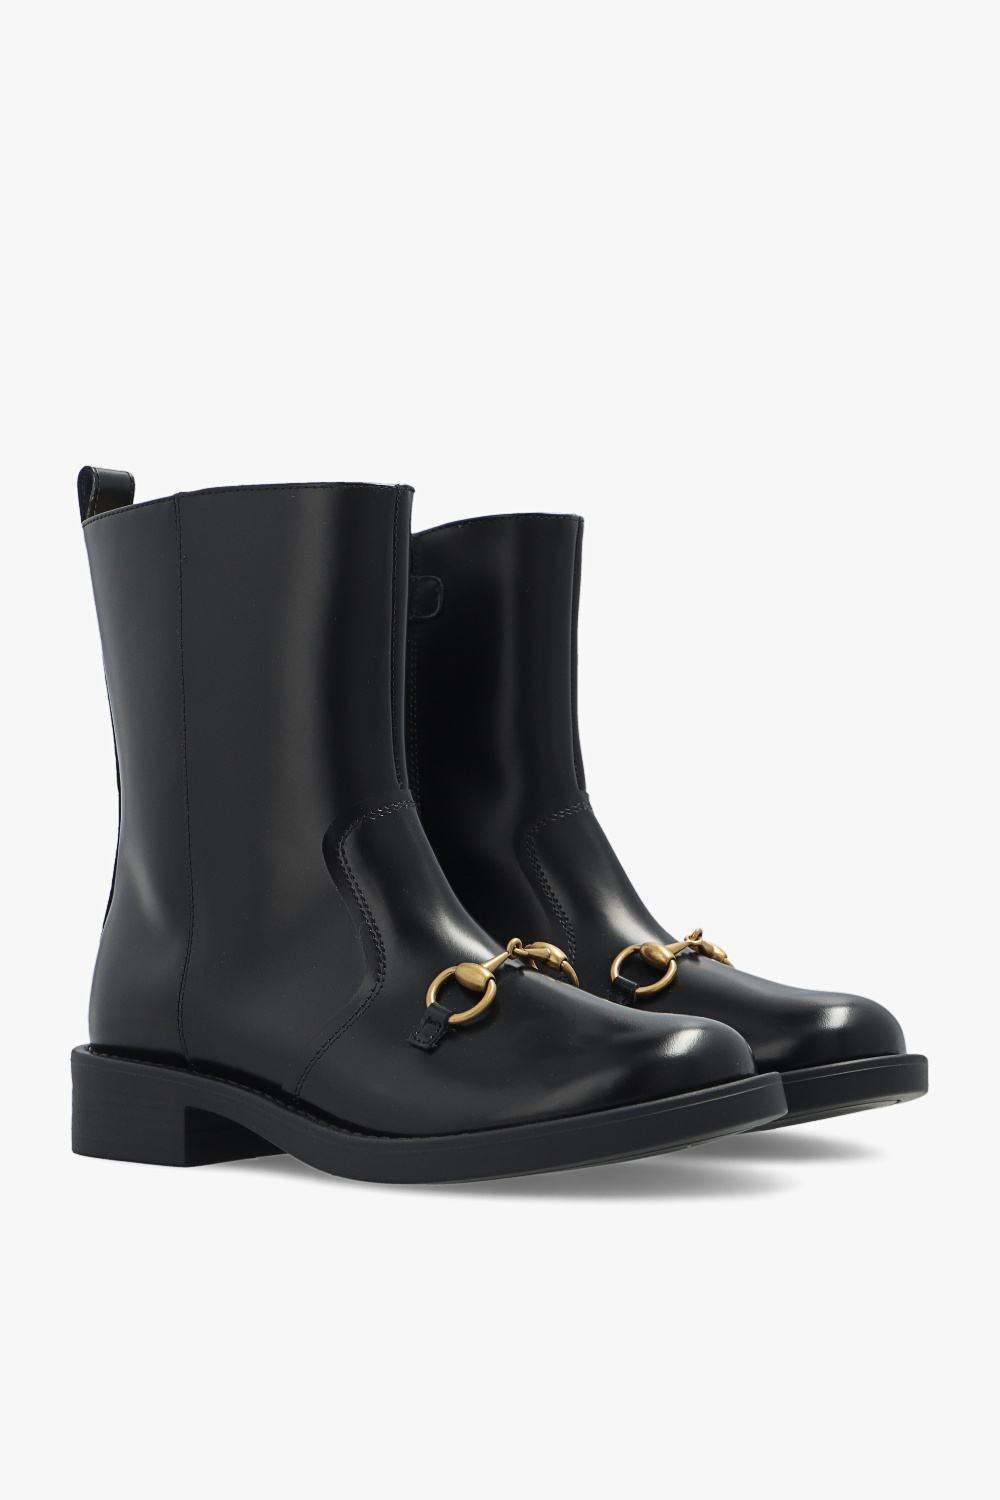 Gucci Kids Puppy ankle boots